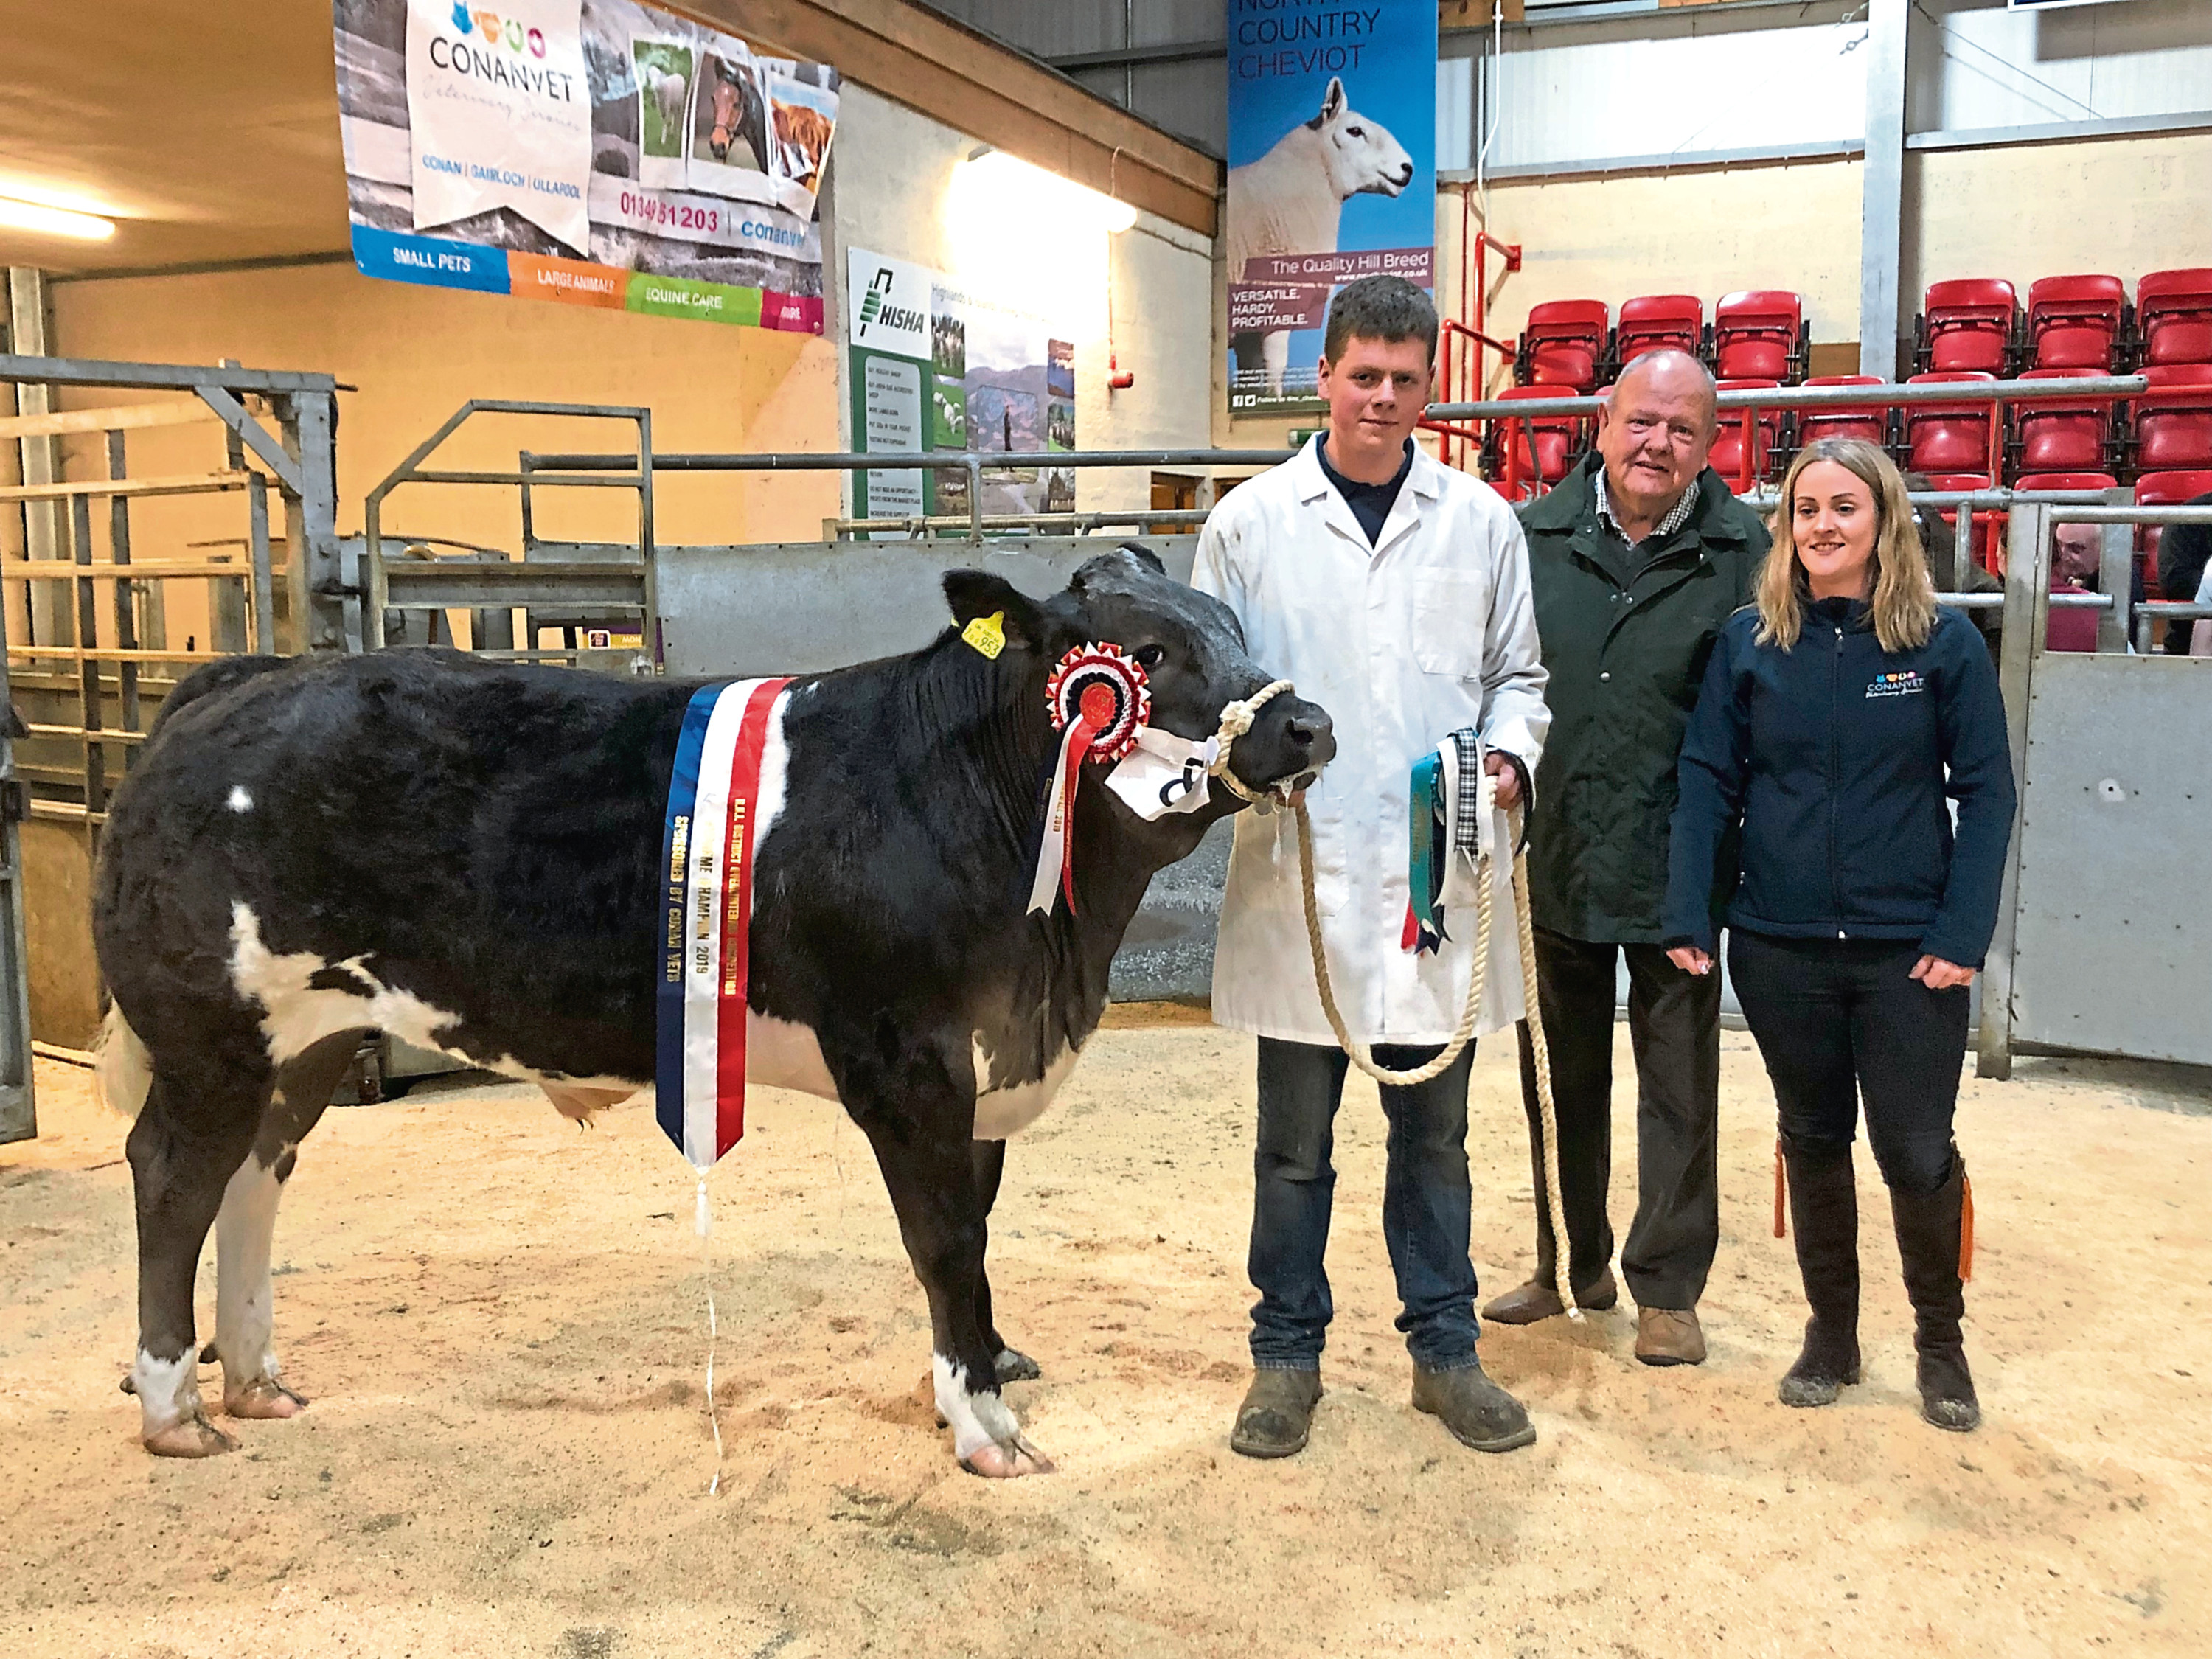 David Dingwall with his overall champion animal which sold for £1,200, pictured with the judge Jock McCallum, Mountrich, Dingwall, and Mary-Jo Grant of sponsors, Conanvet.